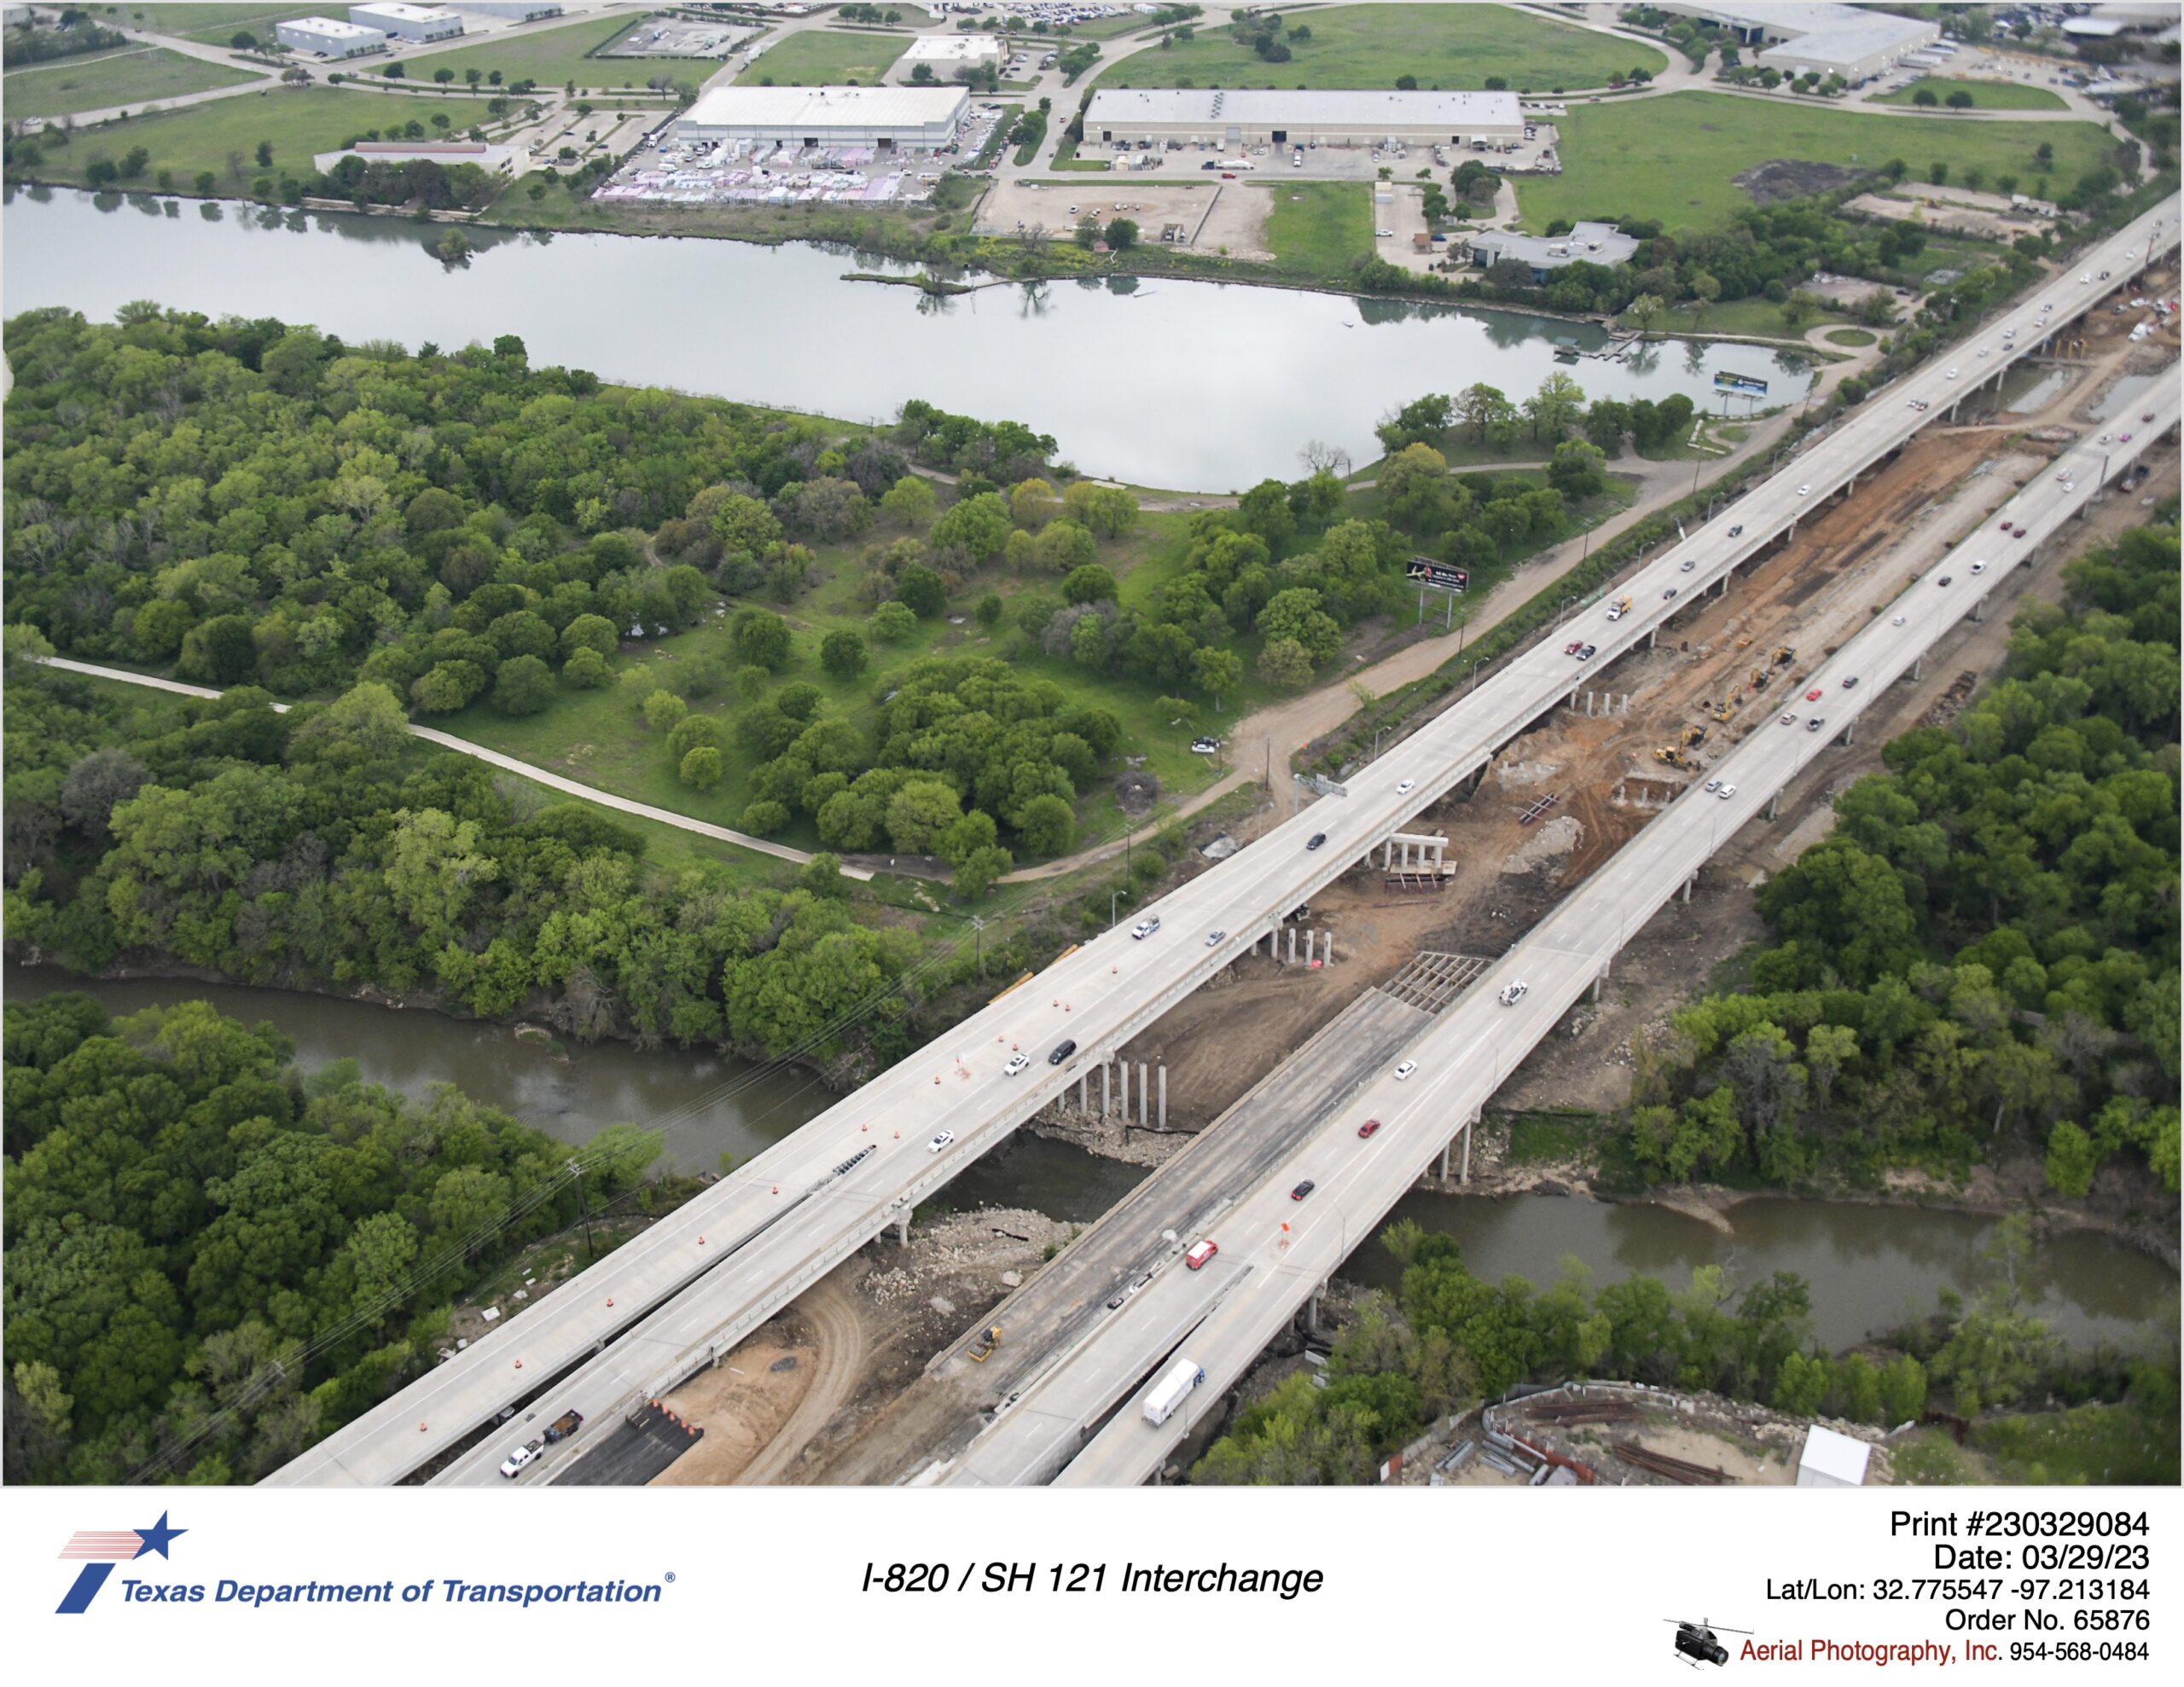 I-820 over Trinity River highlighting interior bridge substructure construction. March 2023.